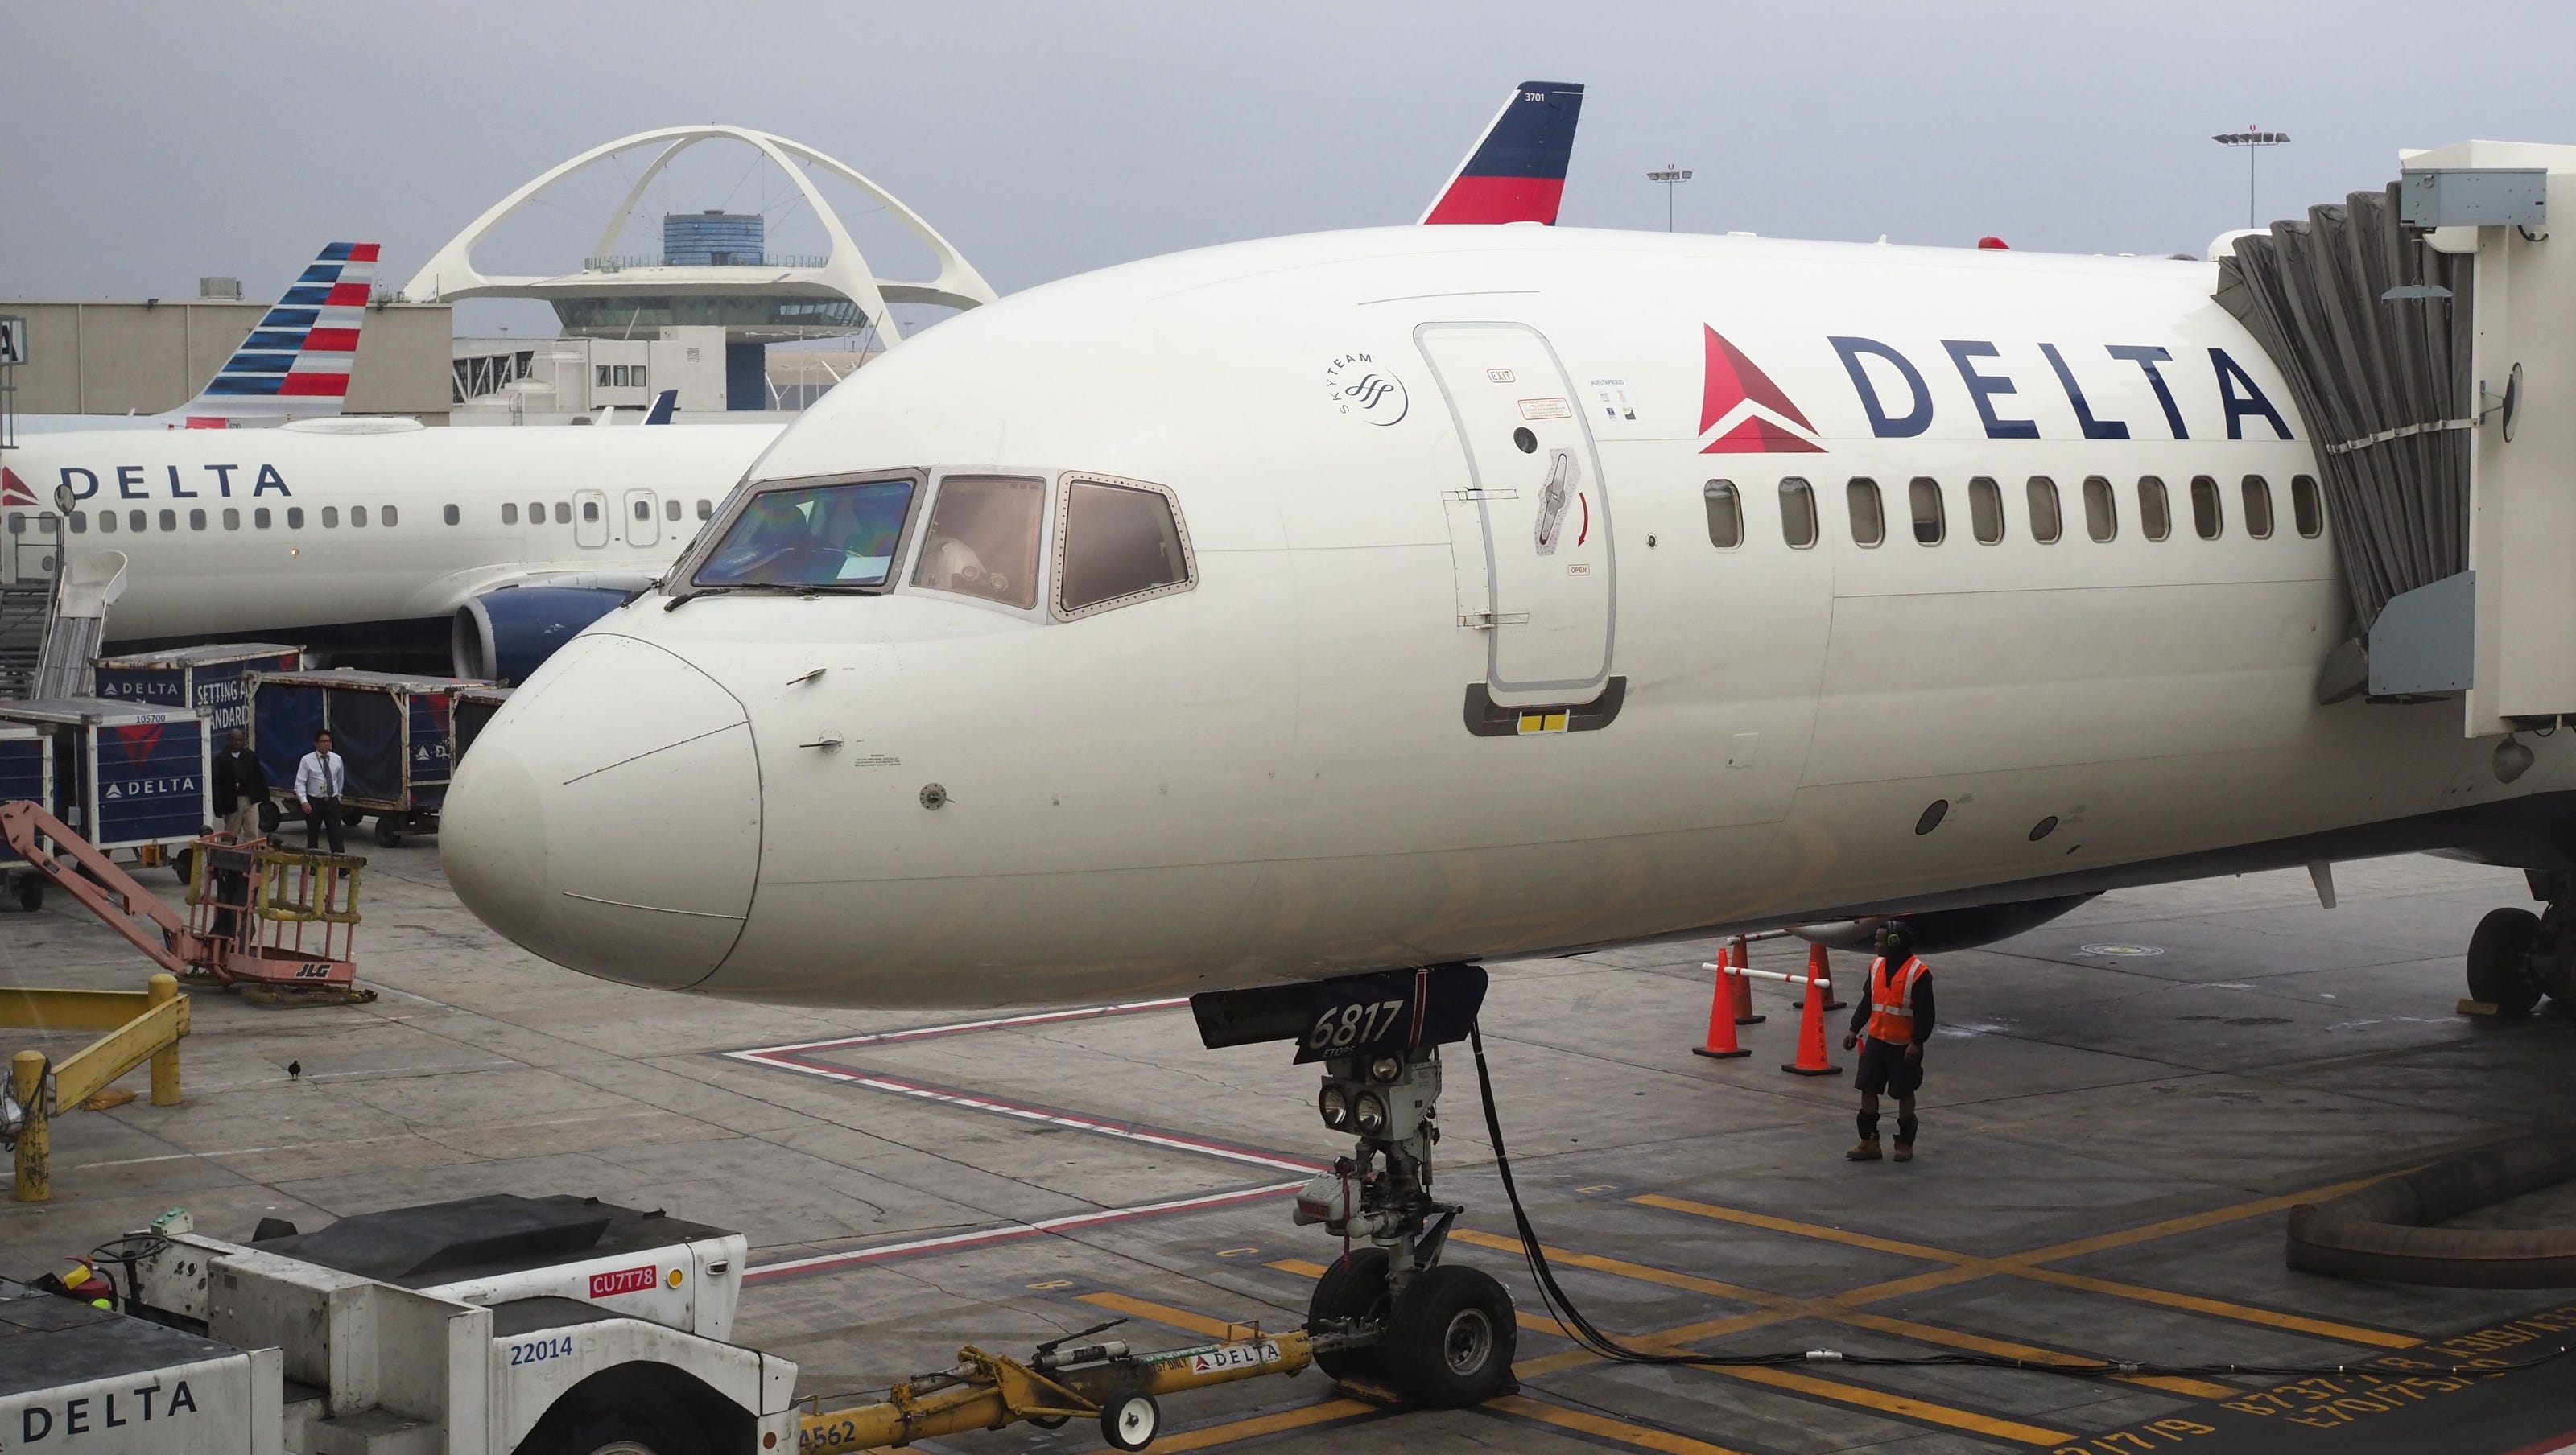 2-strangers-accused-of-sex-on-delta-flight-to-detroit-report-says